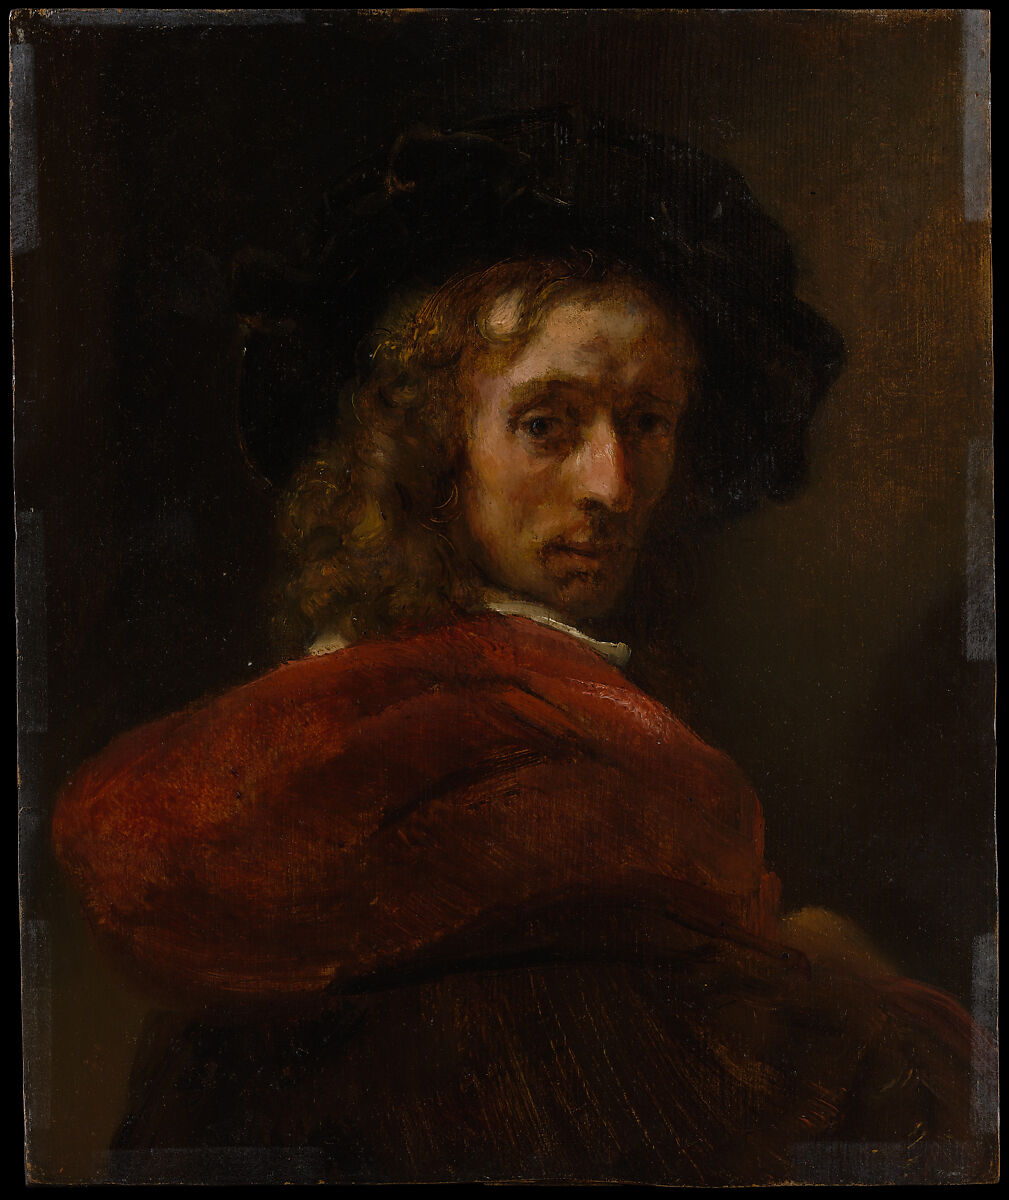 Man in a Red Cloak, Style of Rembrandt (Dutch, 1650s or early 1660s), Oil on wood 